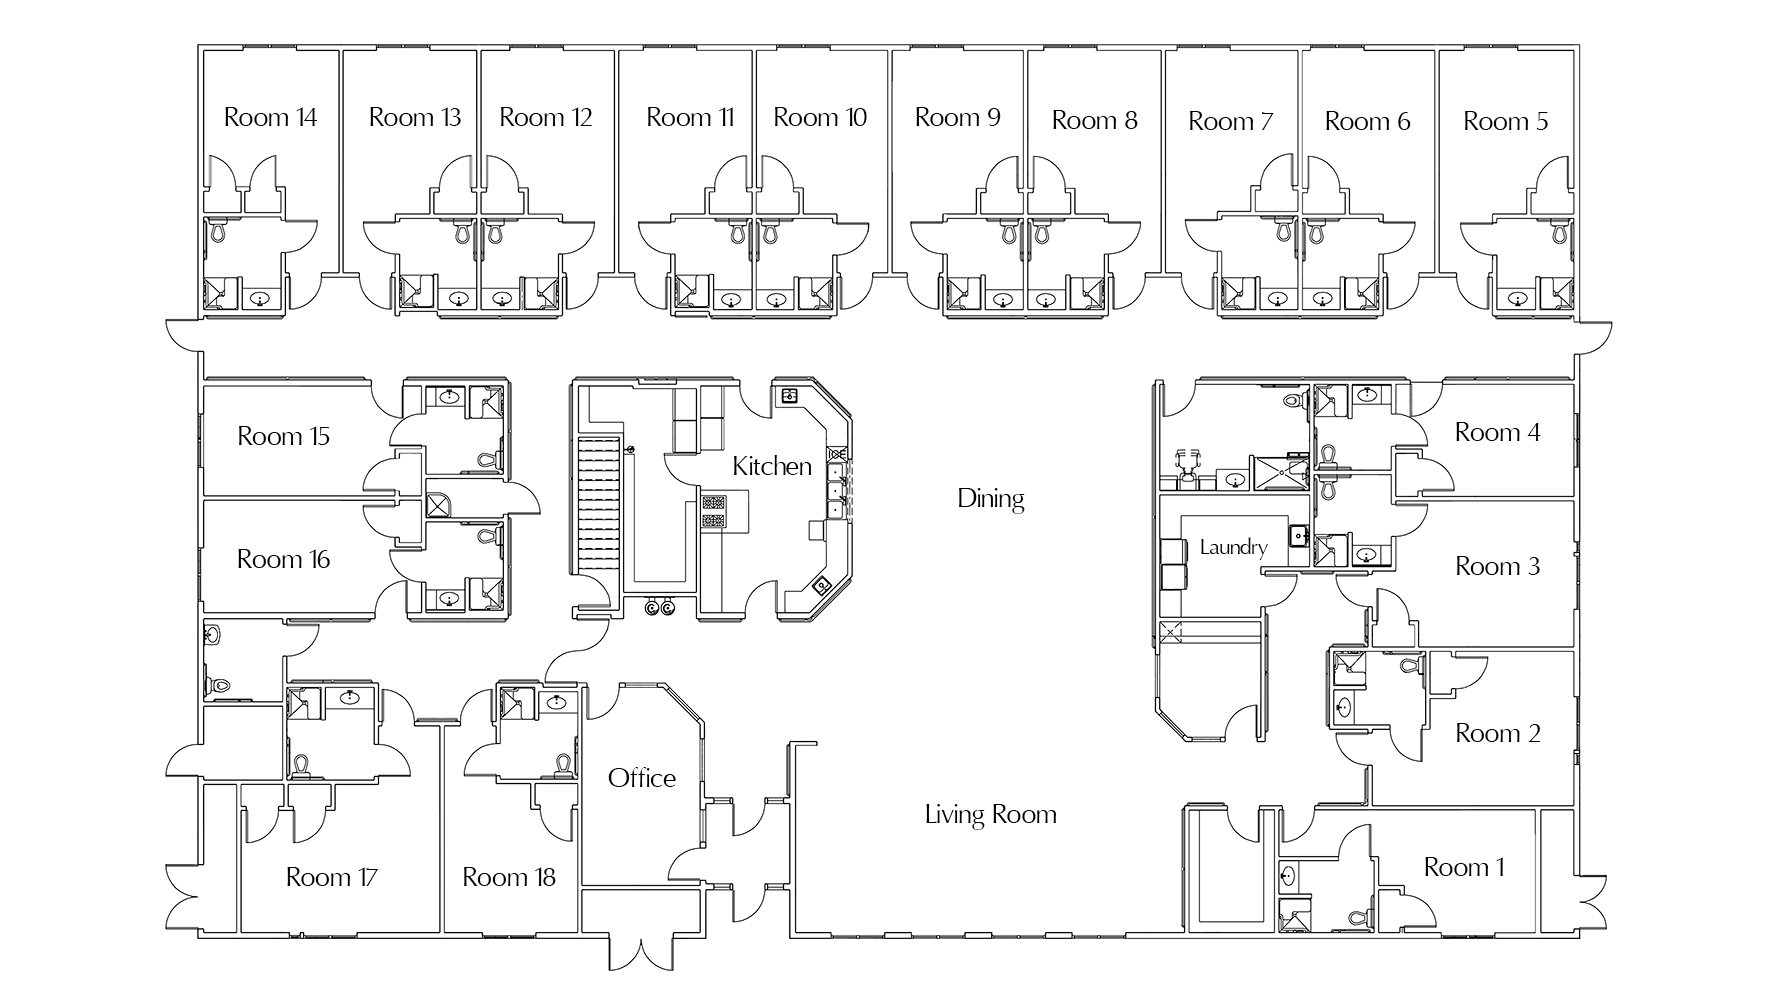 Master floorplan of the Memory Care home at the BeeHive